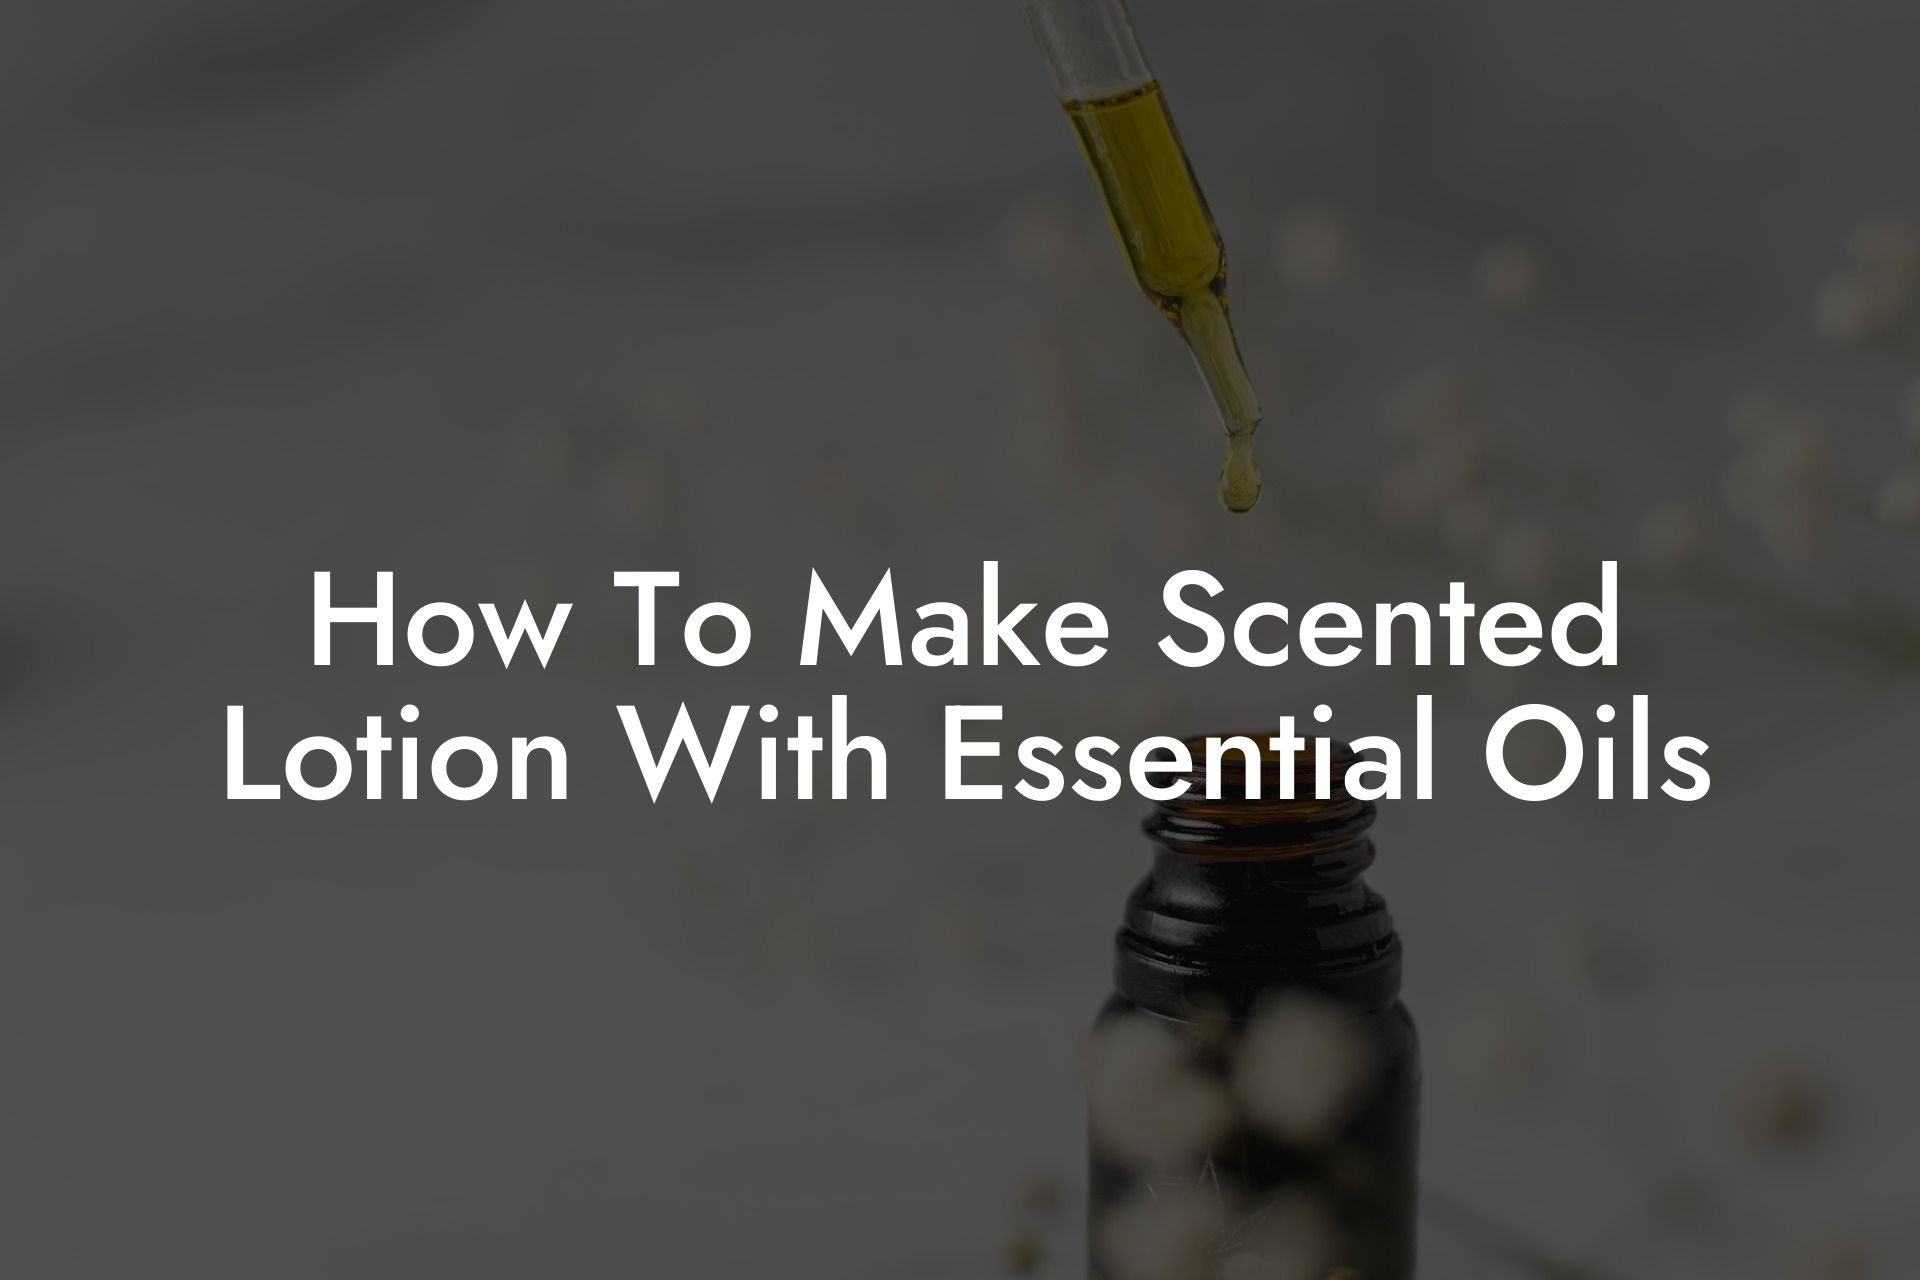 How To Make Scented Lotion With Essential Oils